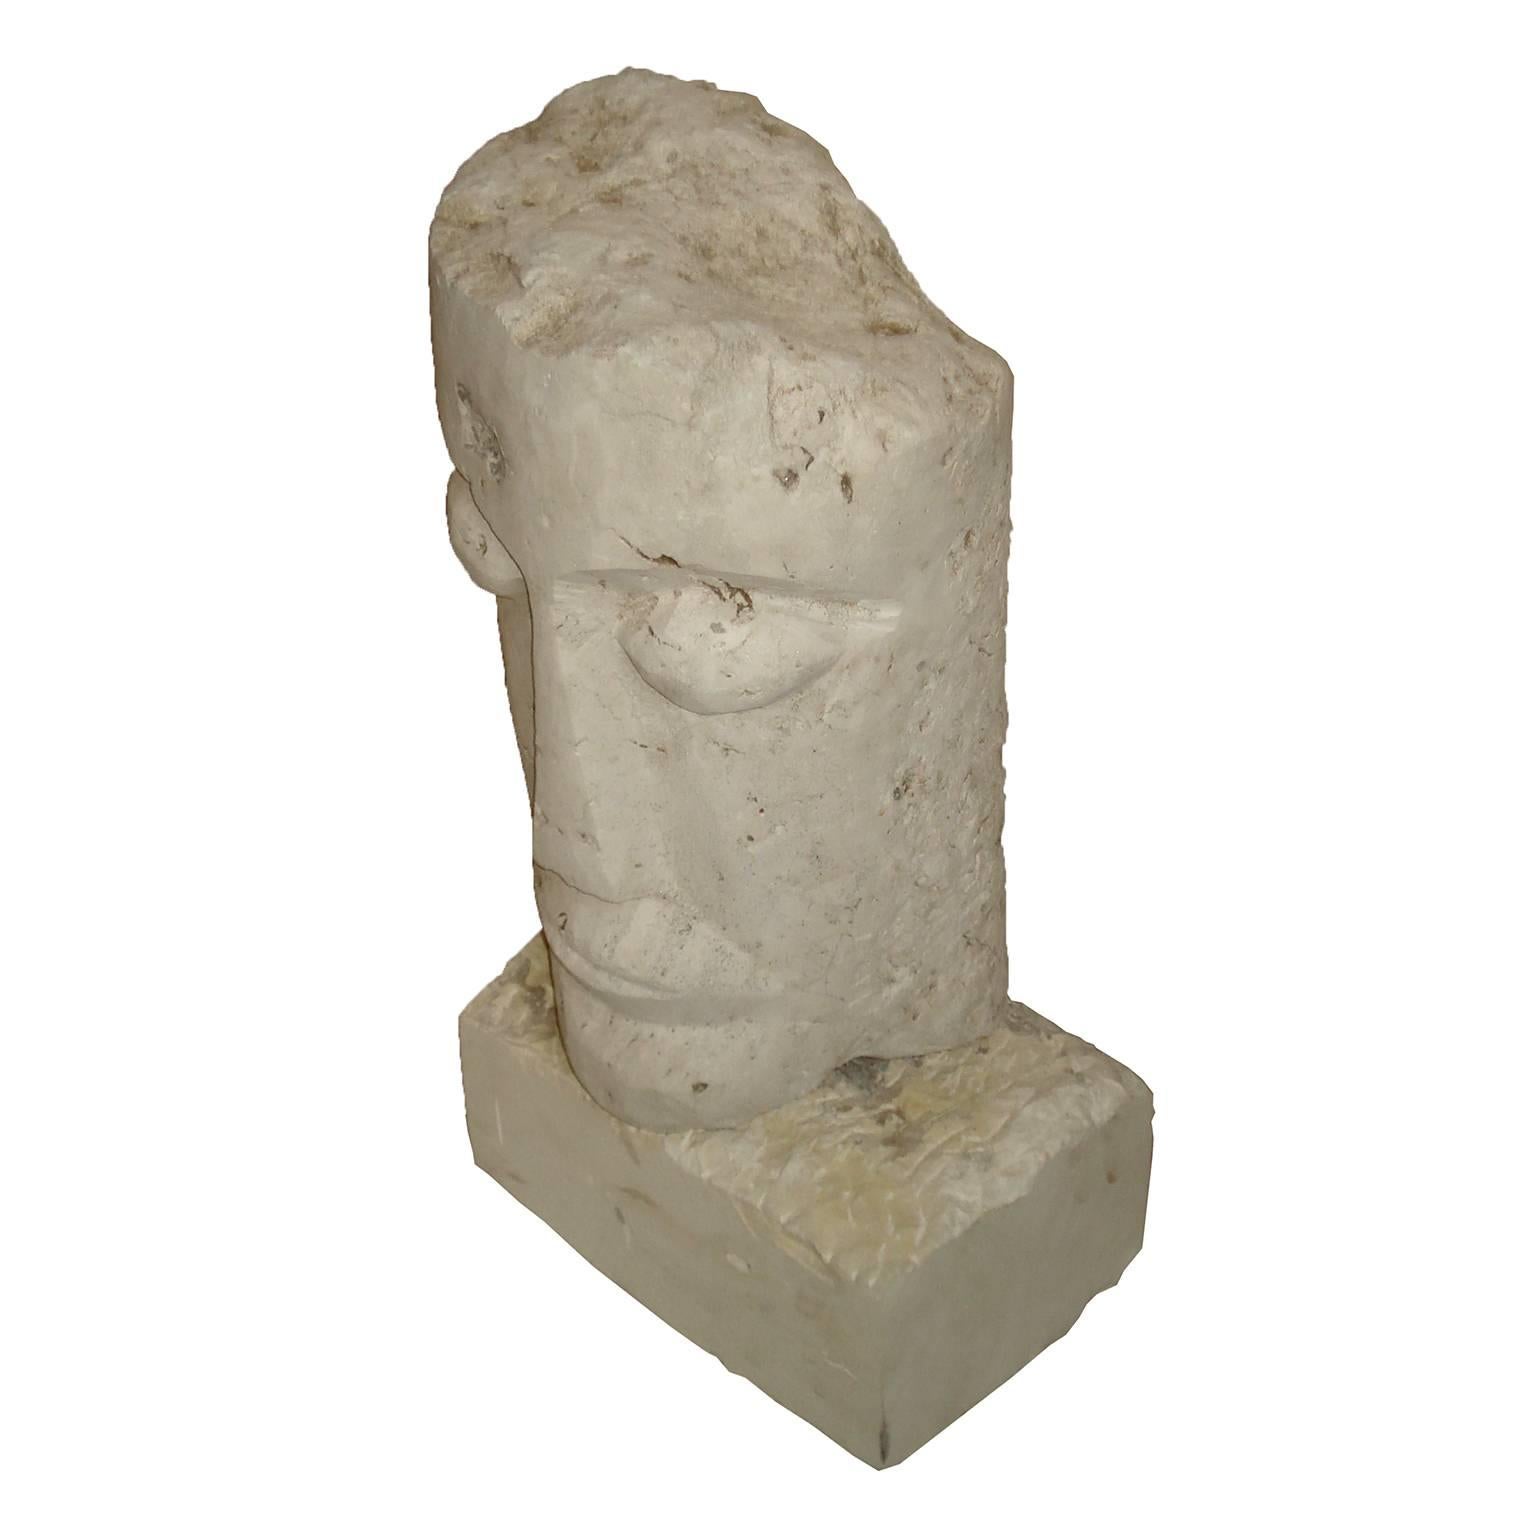 Large Cubist Carved Stone Sculpture Depicting a Man Head For Sale 6